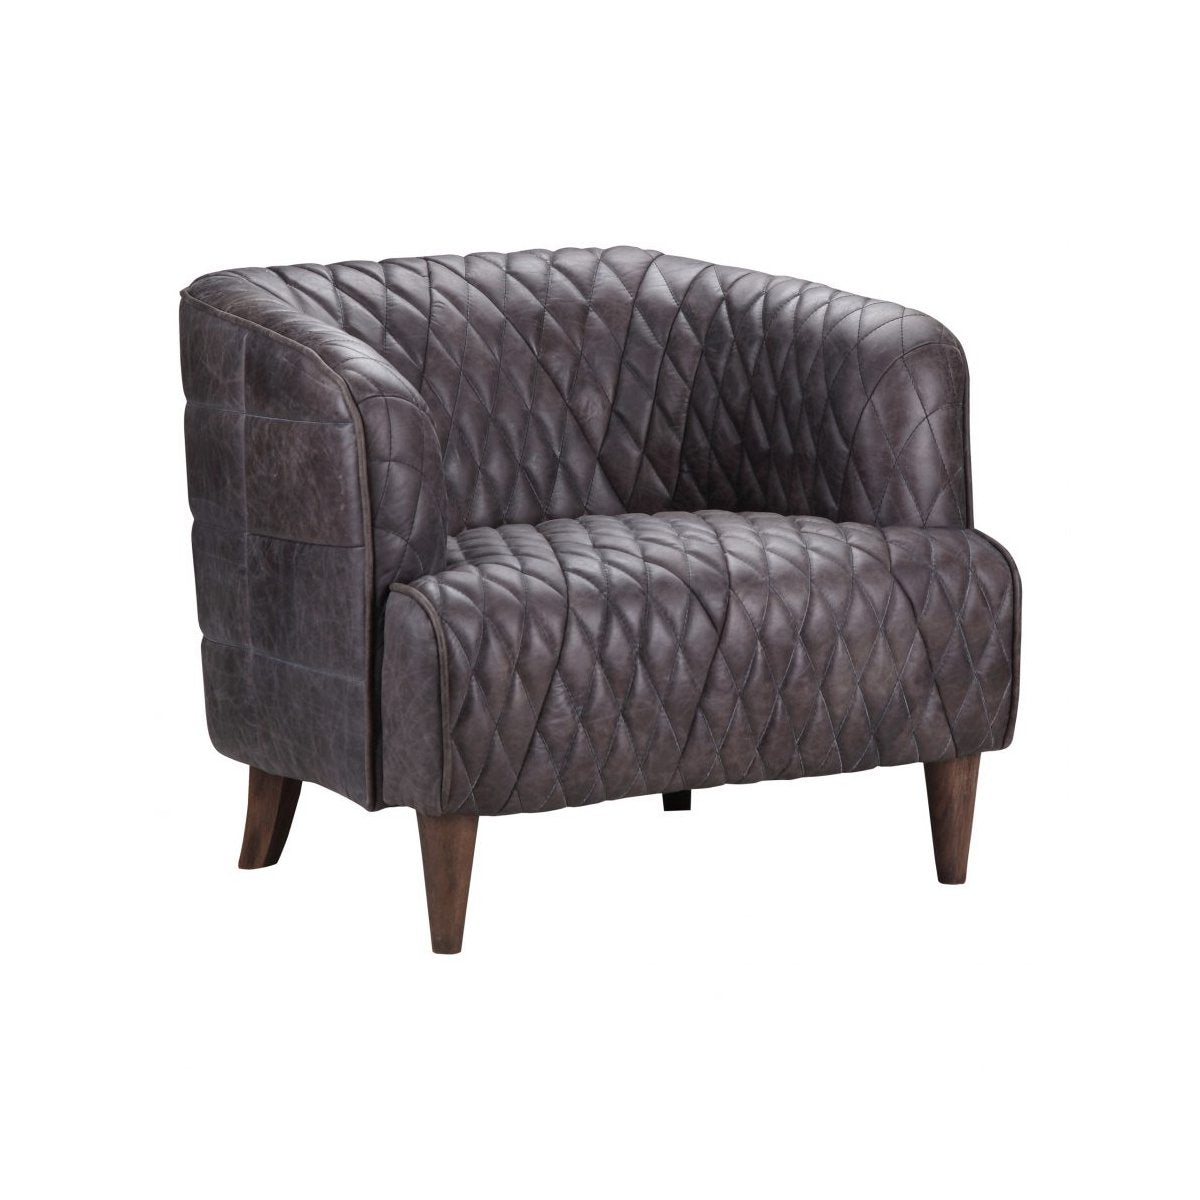 Load image into Gallery viewer, Magdelan Tufted Leather Arm Chair BlackOccasional Chairs Moe&amp;#39;s  Black   Four Hands, Burke Decor, Mid Century Modern Furniture, Old Bones Furniture Company, Old Bones Co, Modern Mid Century, Designer Furniture, https://www.oldbonesco.com/
